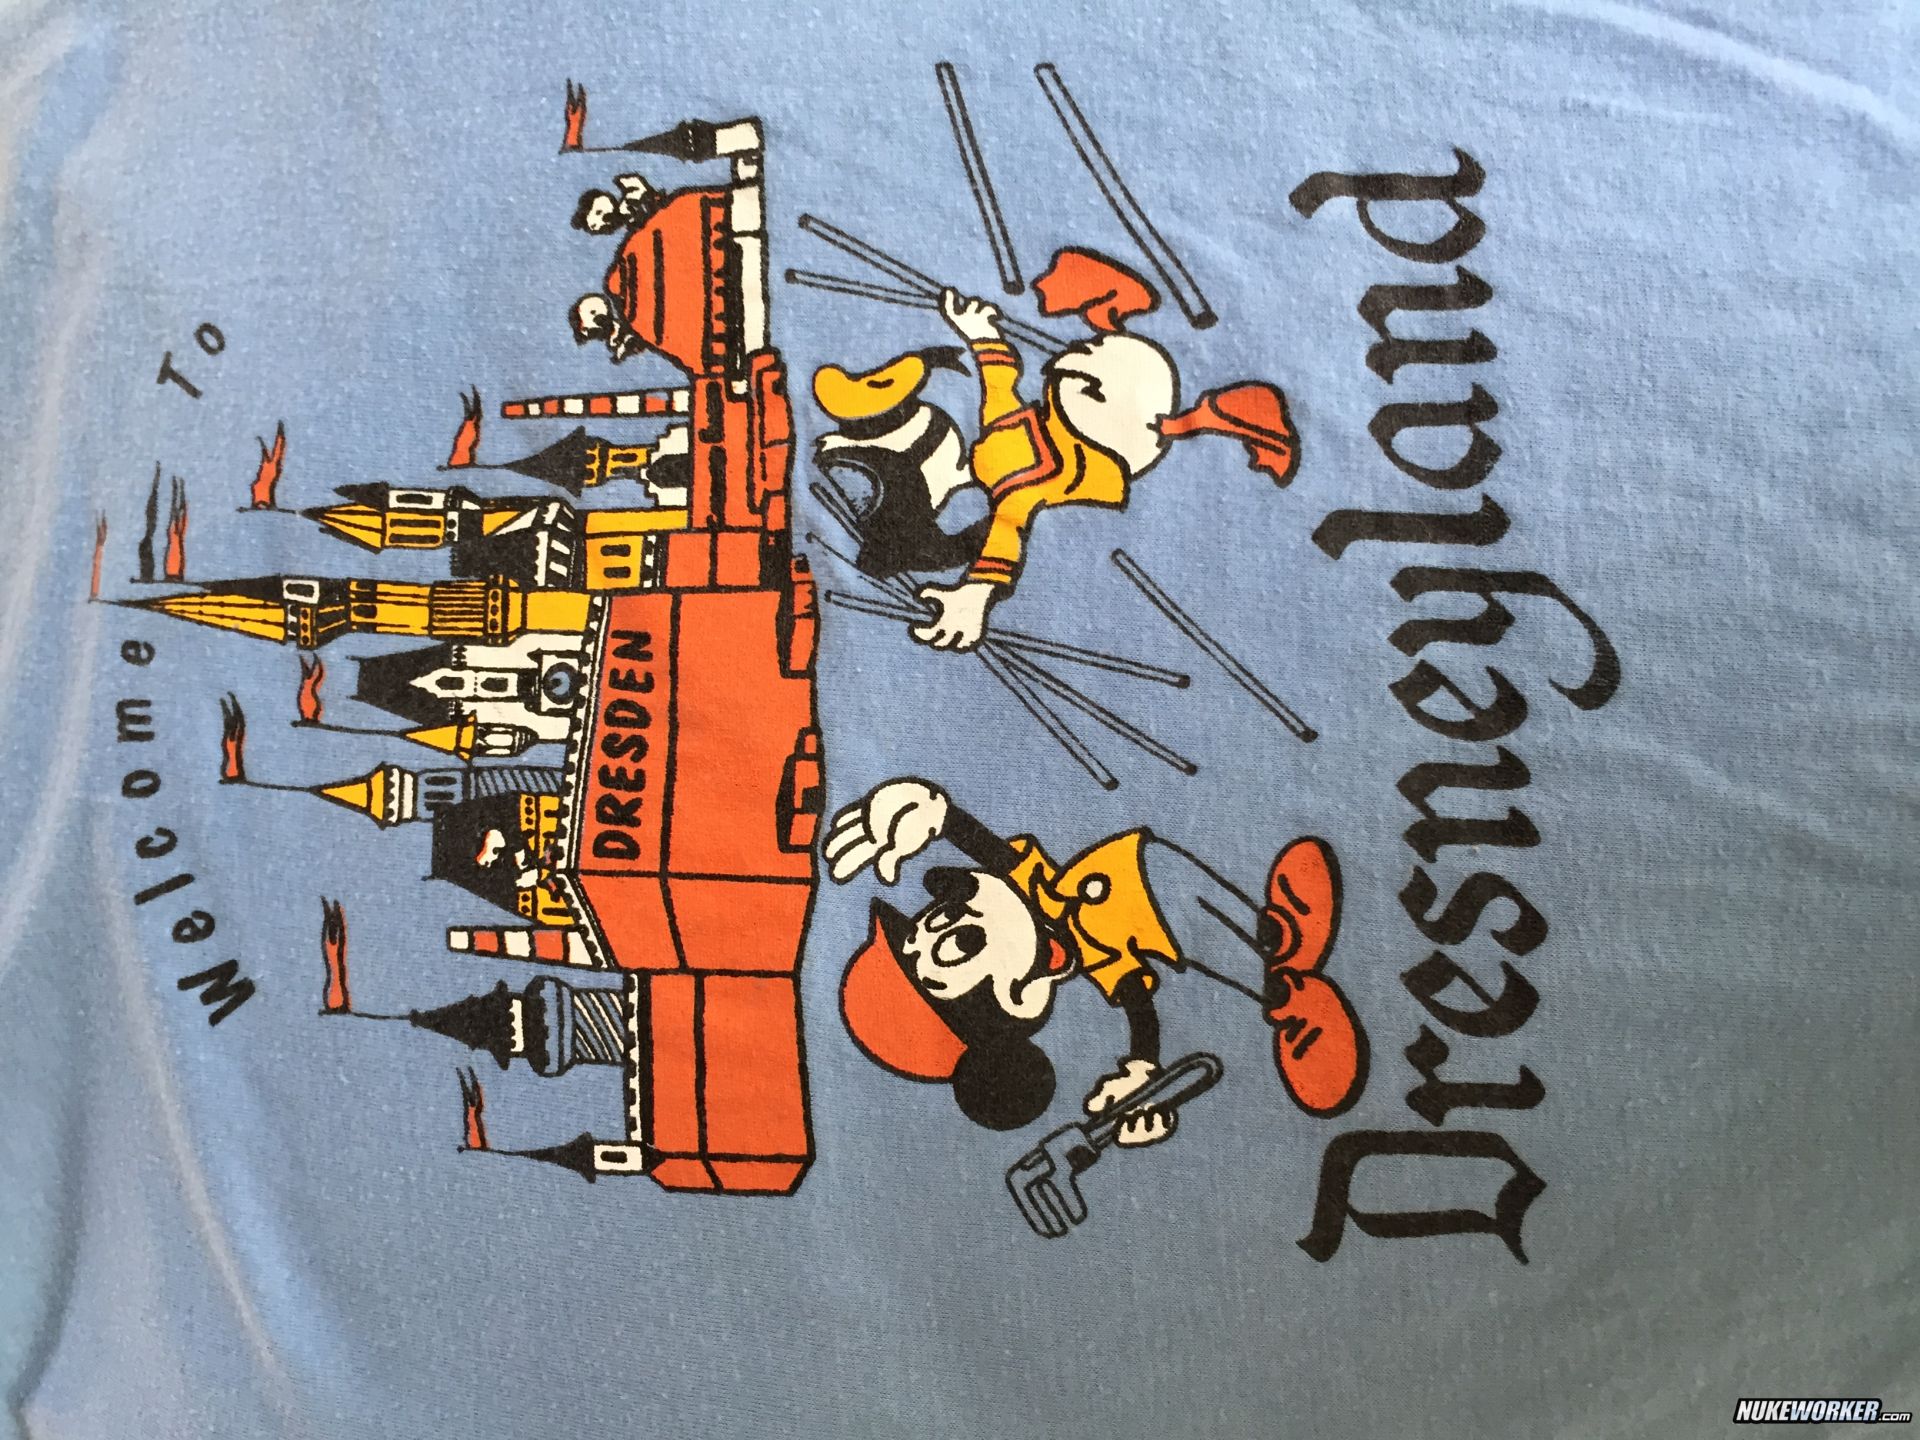 Dresneyland!
From my outage t-shirt collection
